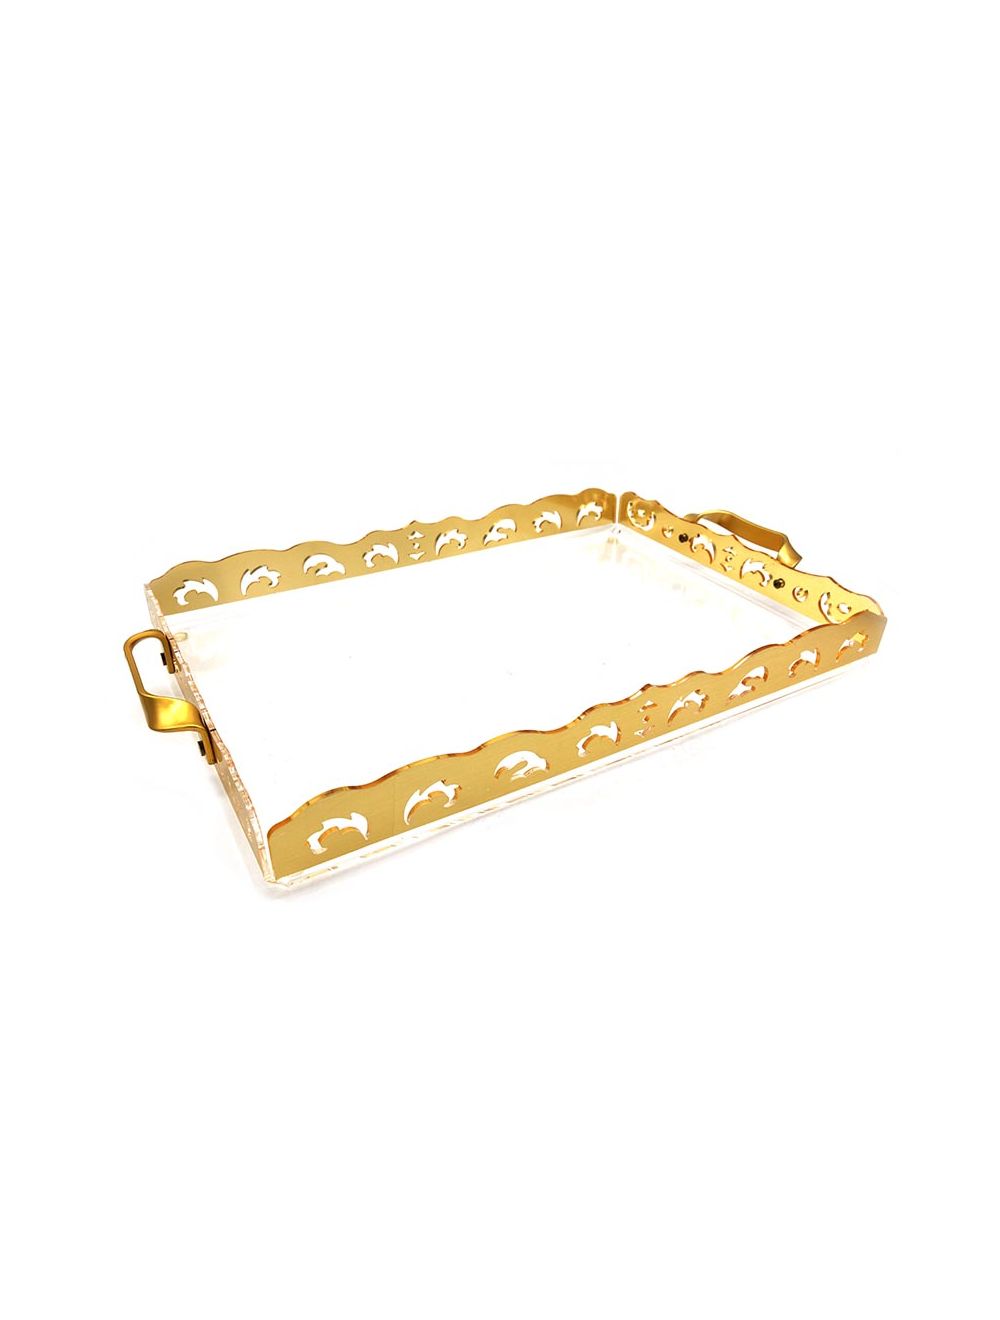 Large Rectangular Acrylic Gold-Plated Tray with Handle